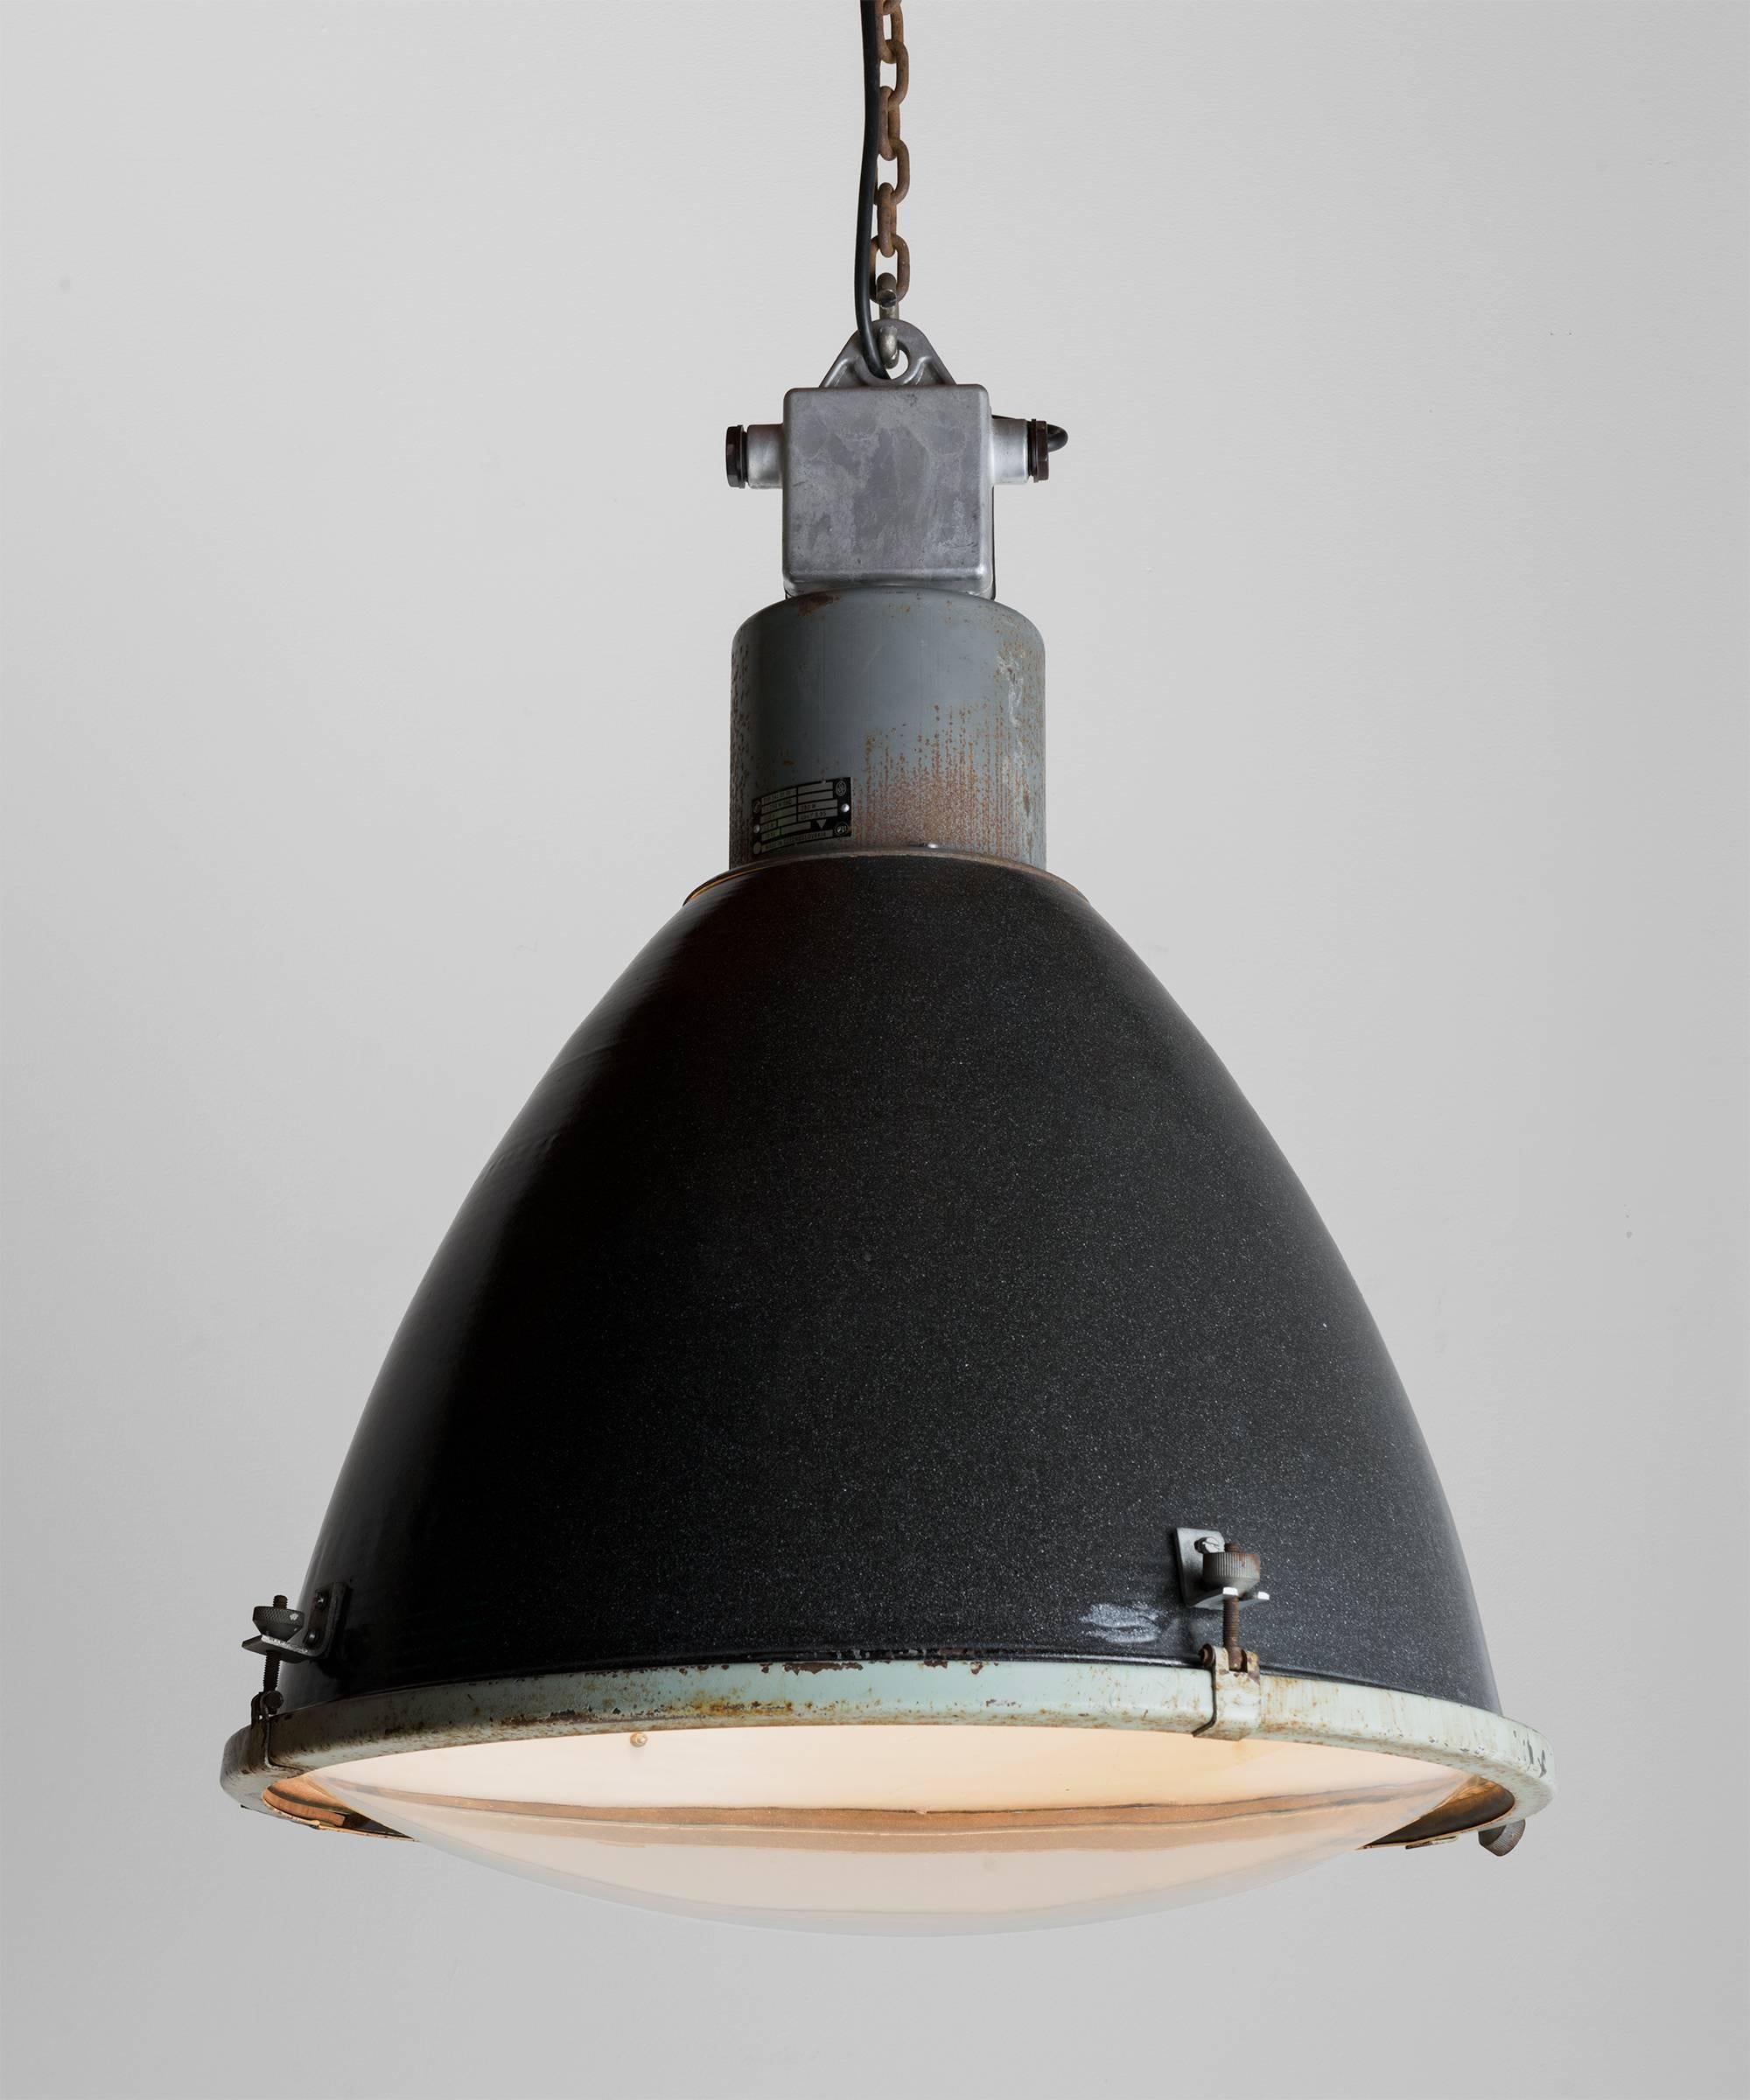 Black metal Industrial pendant, circa 1950.

Large factory light with original paint and convex glass shade.